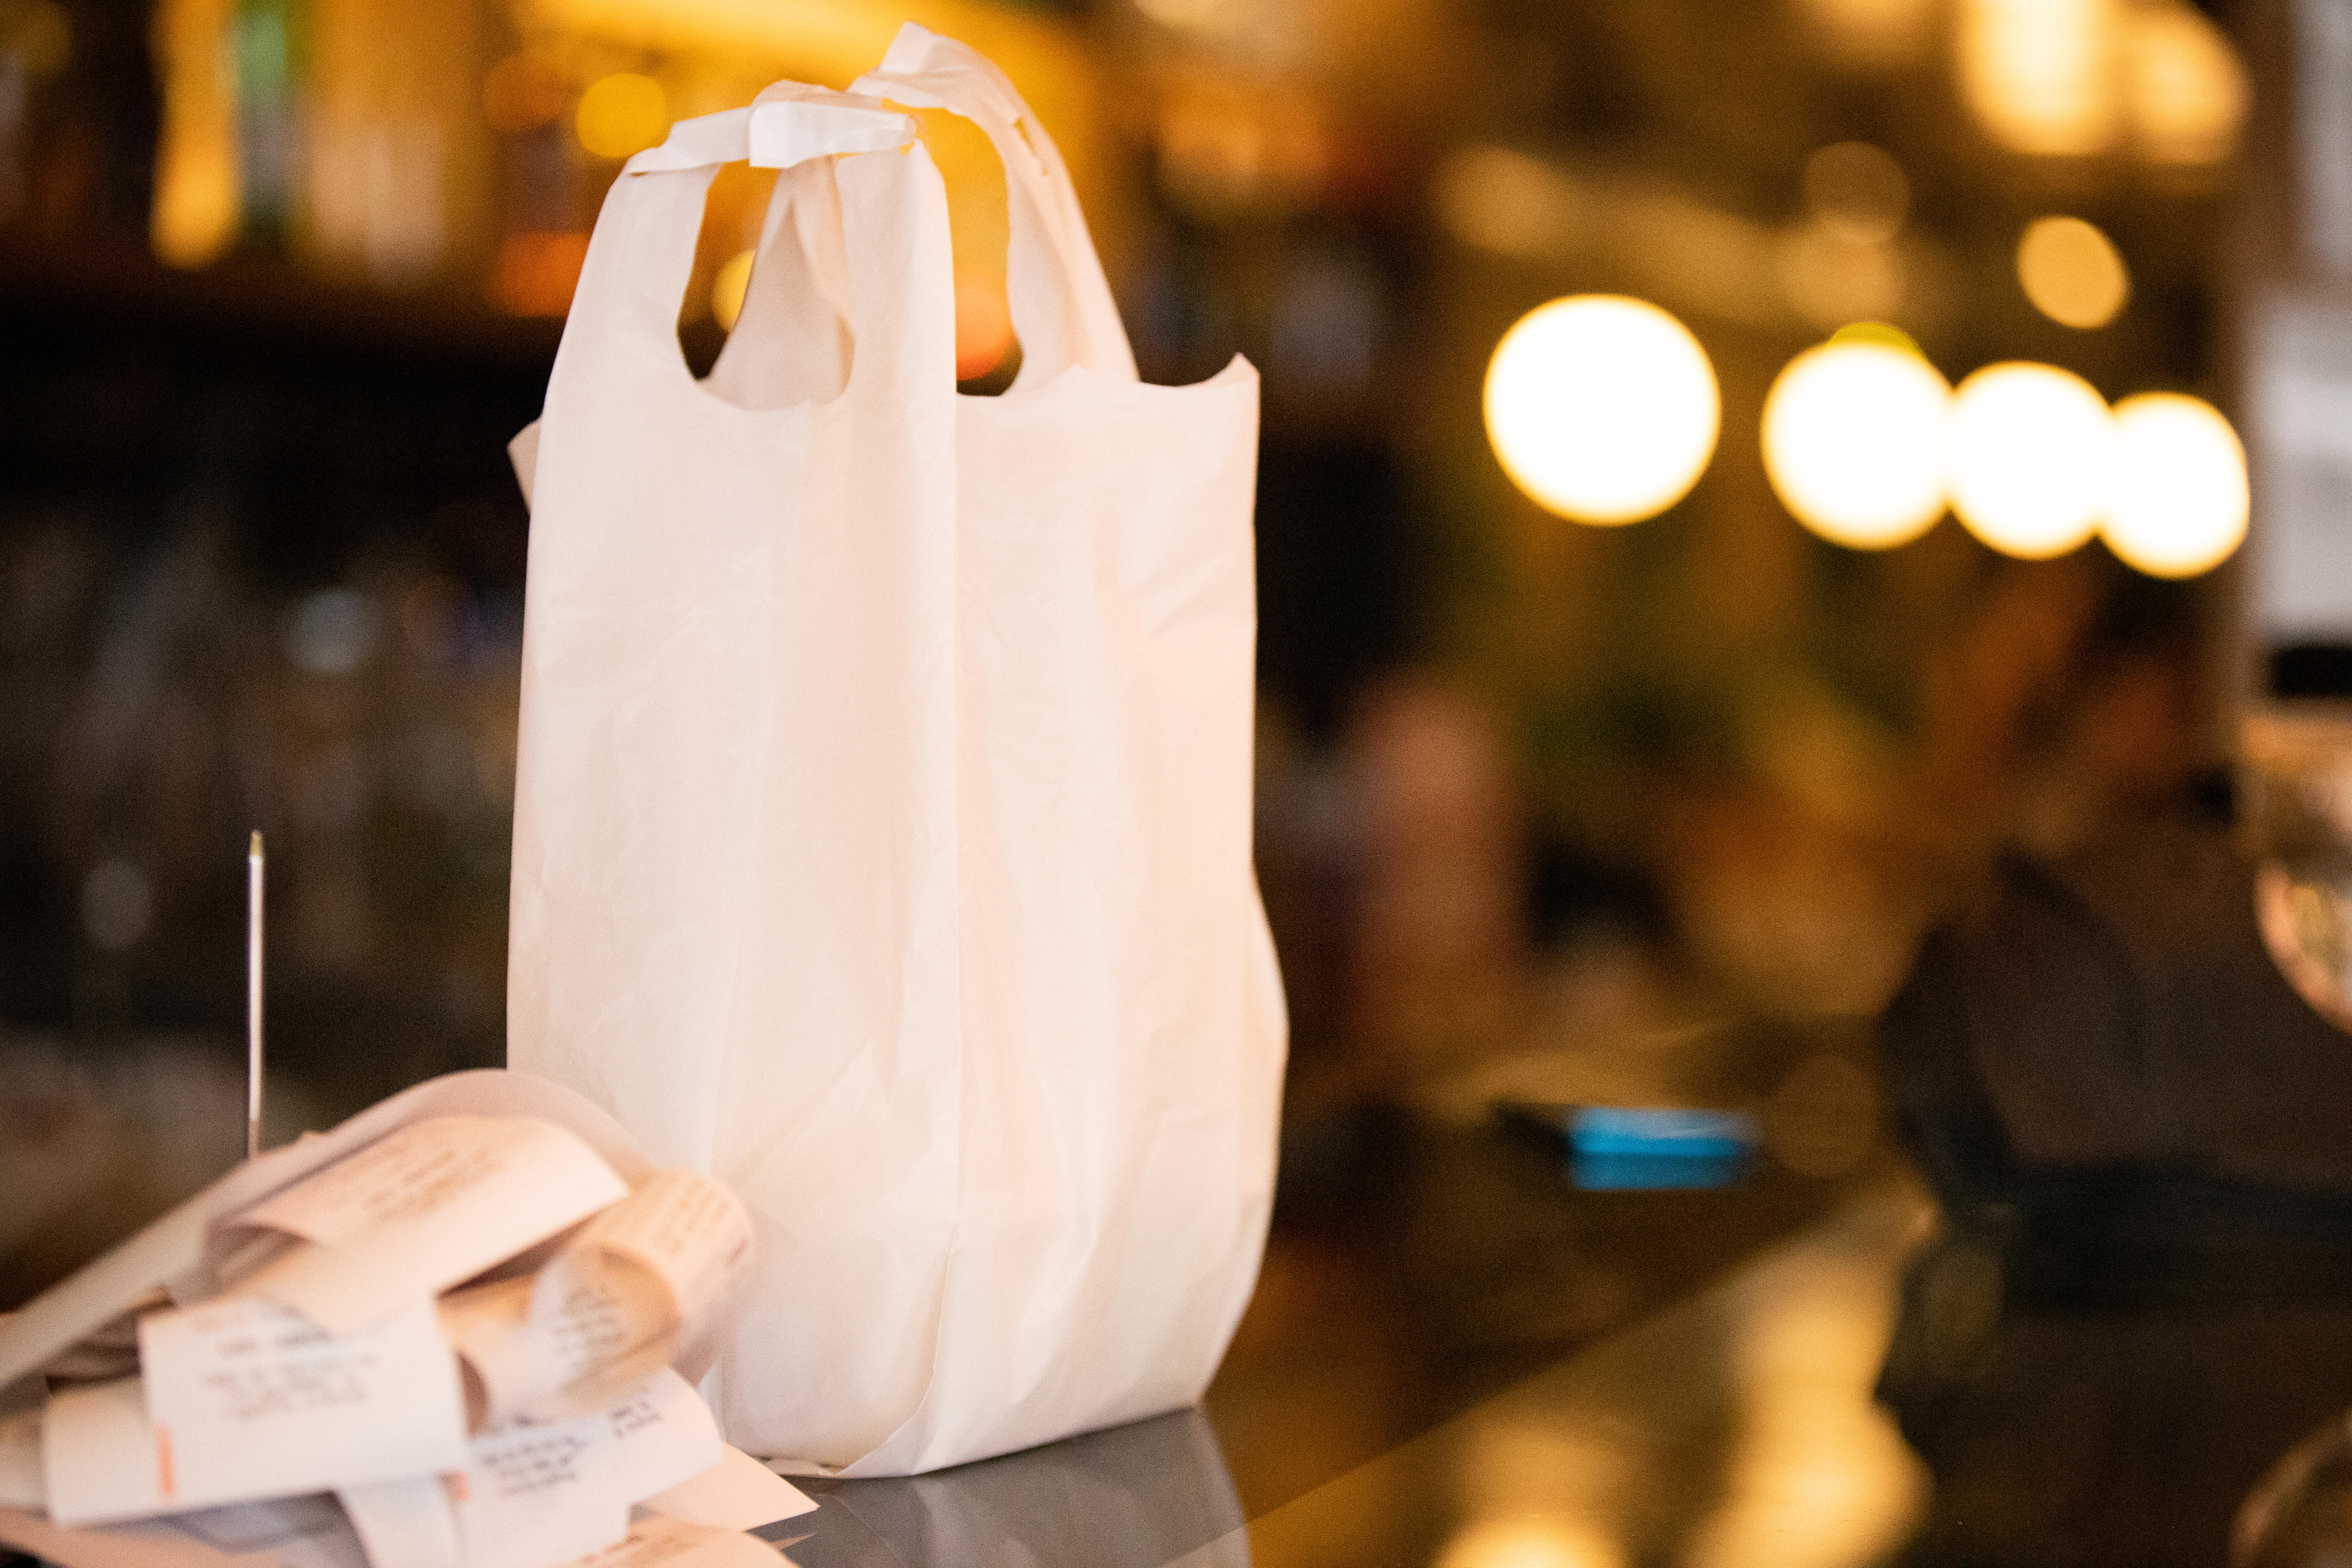 A white plastic bag on a restaurant counter.